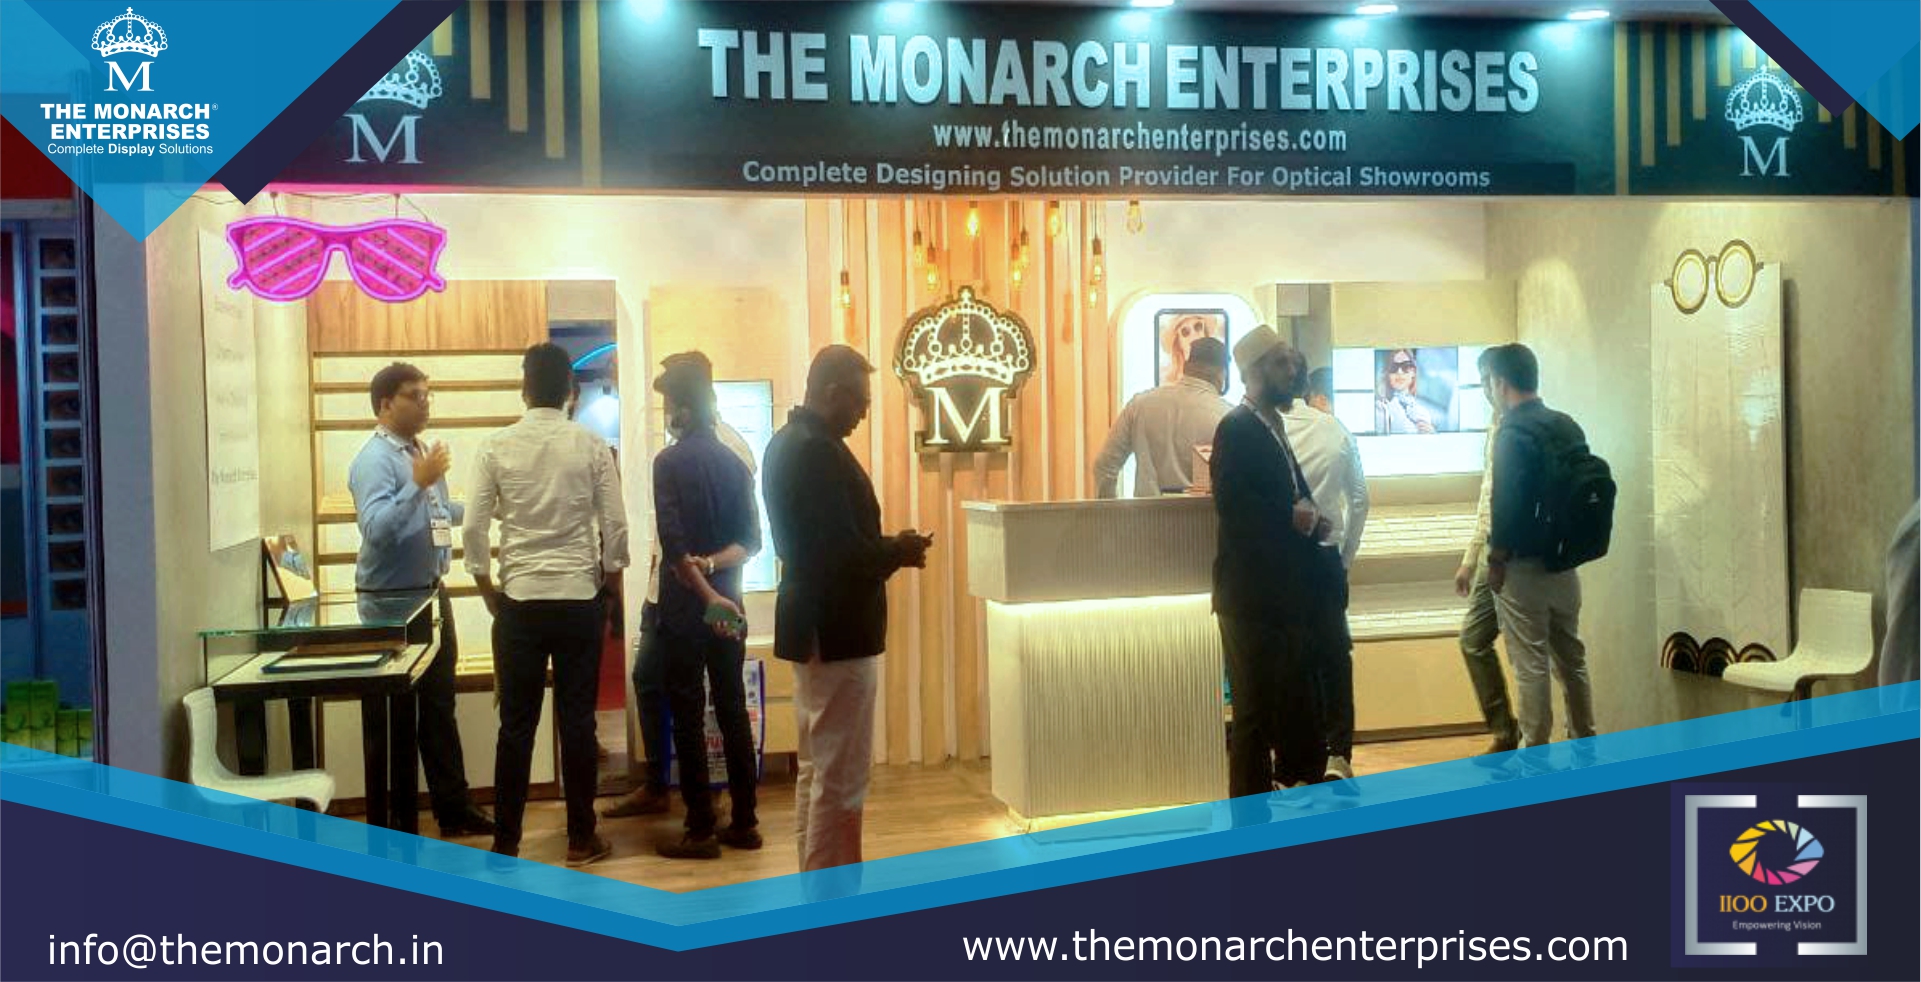 The Monarch Enterprises participating in IIOO Expo Chennai